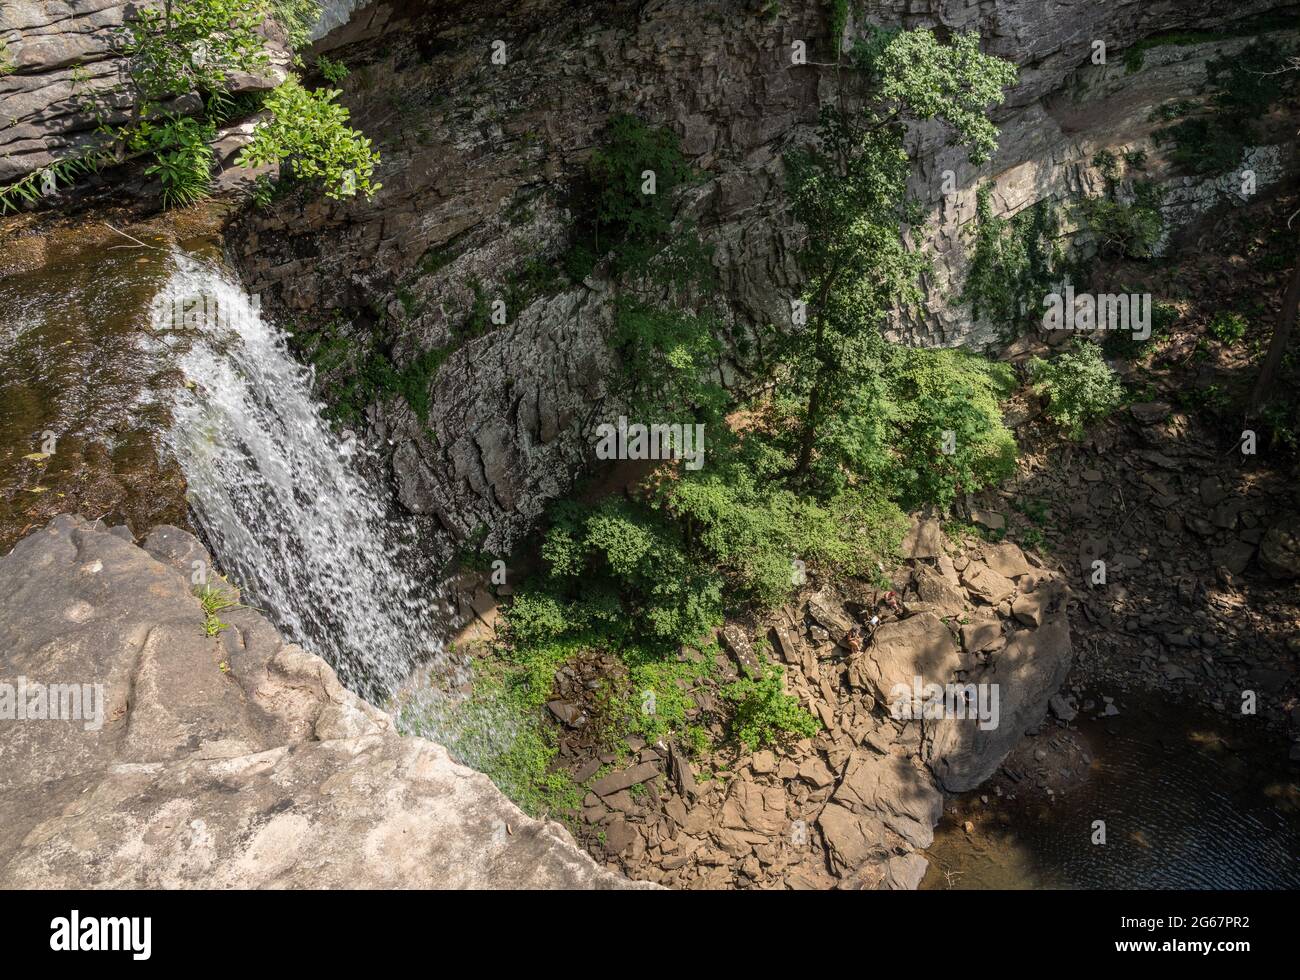 Water flowing over the cliff edge at Ozone falls in Tennessee as the water flows into the pool below Stock Photo